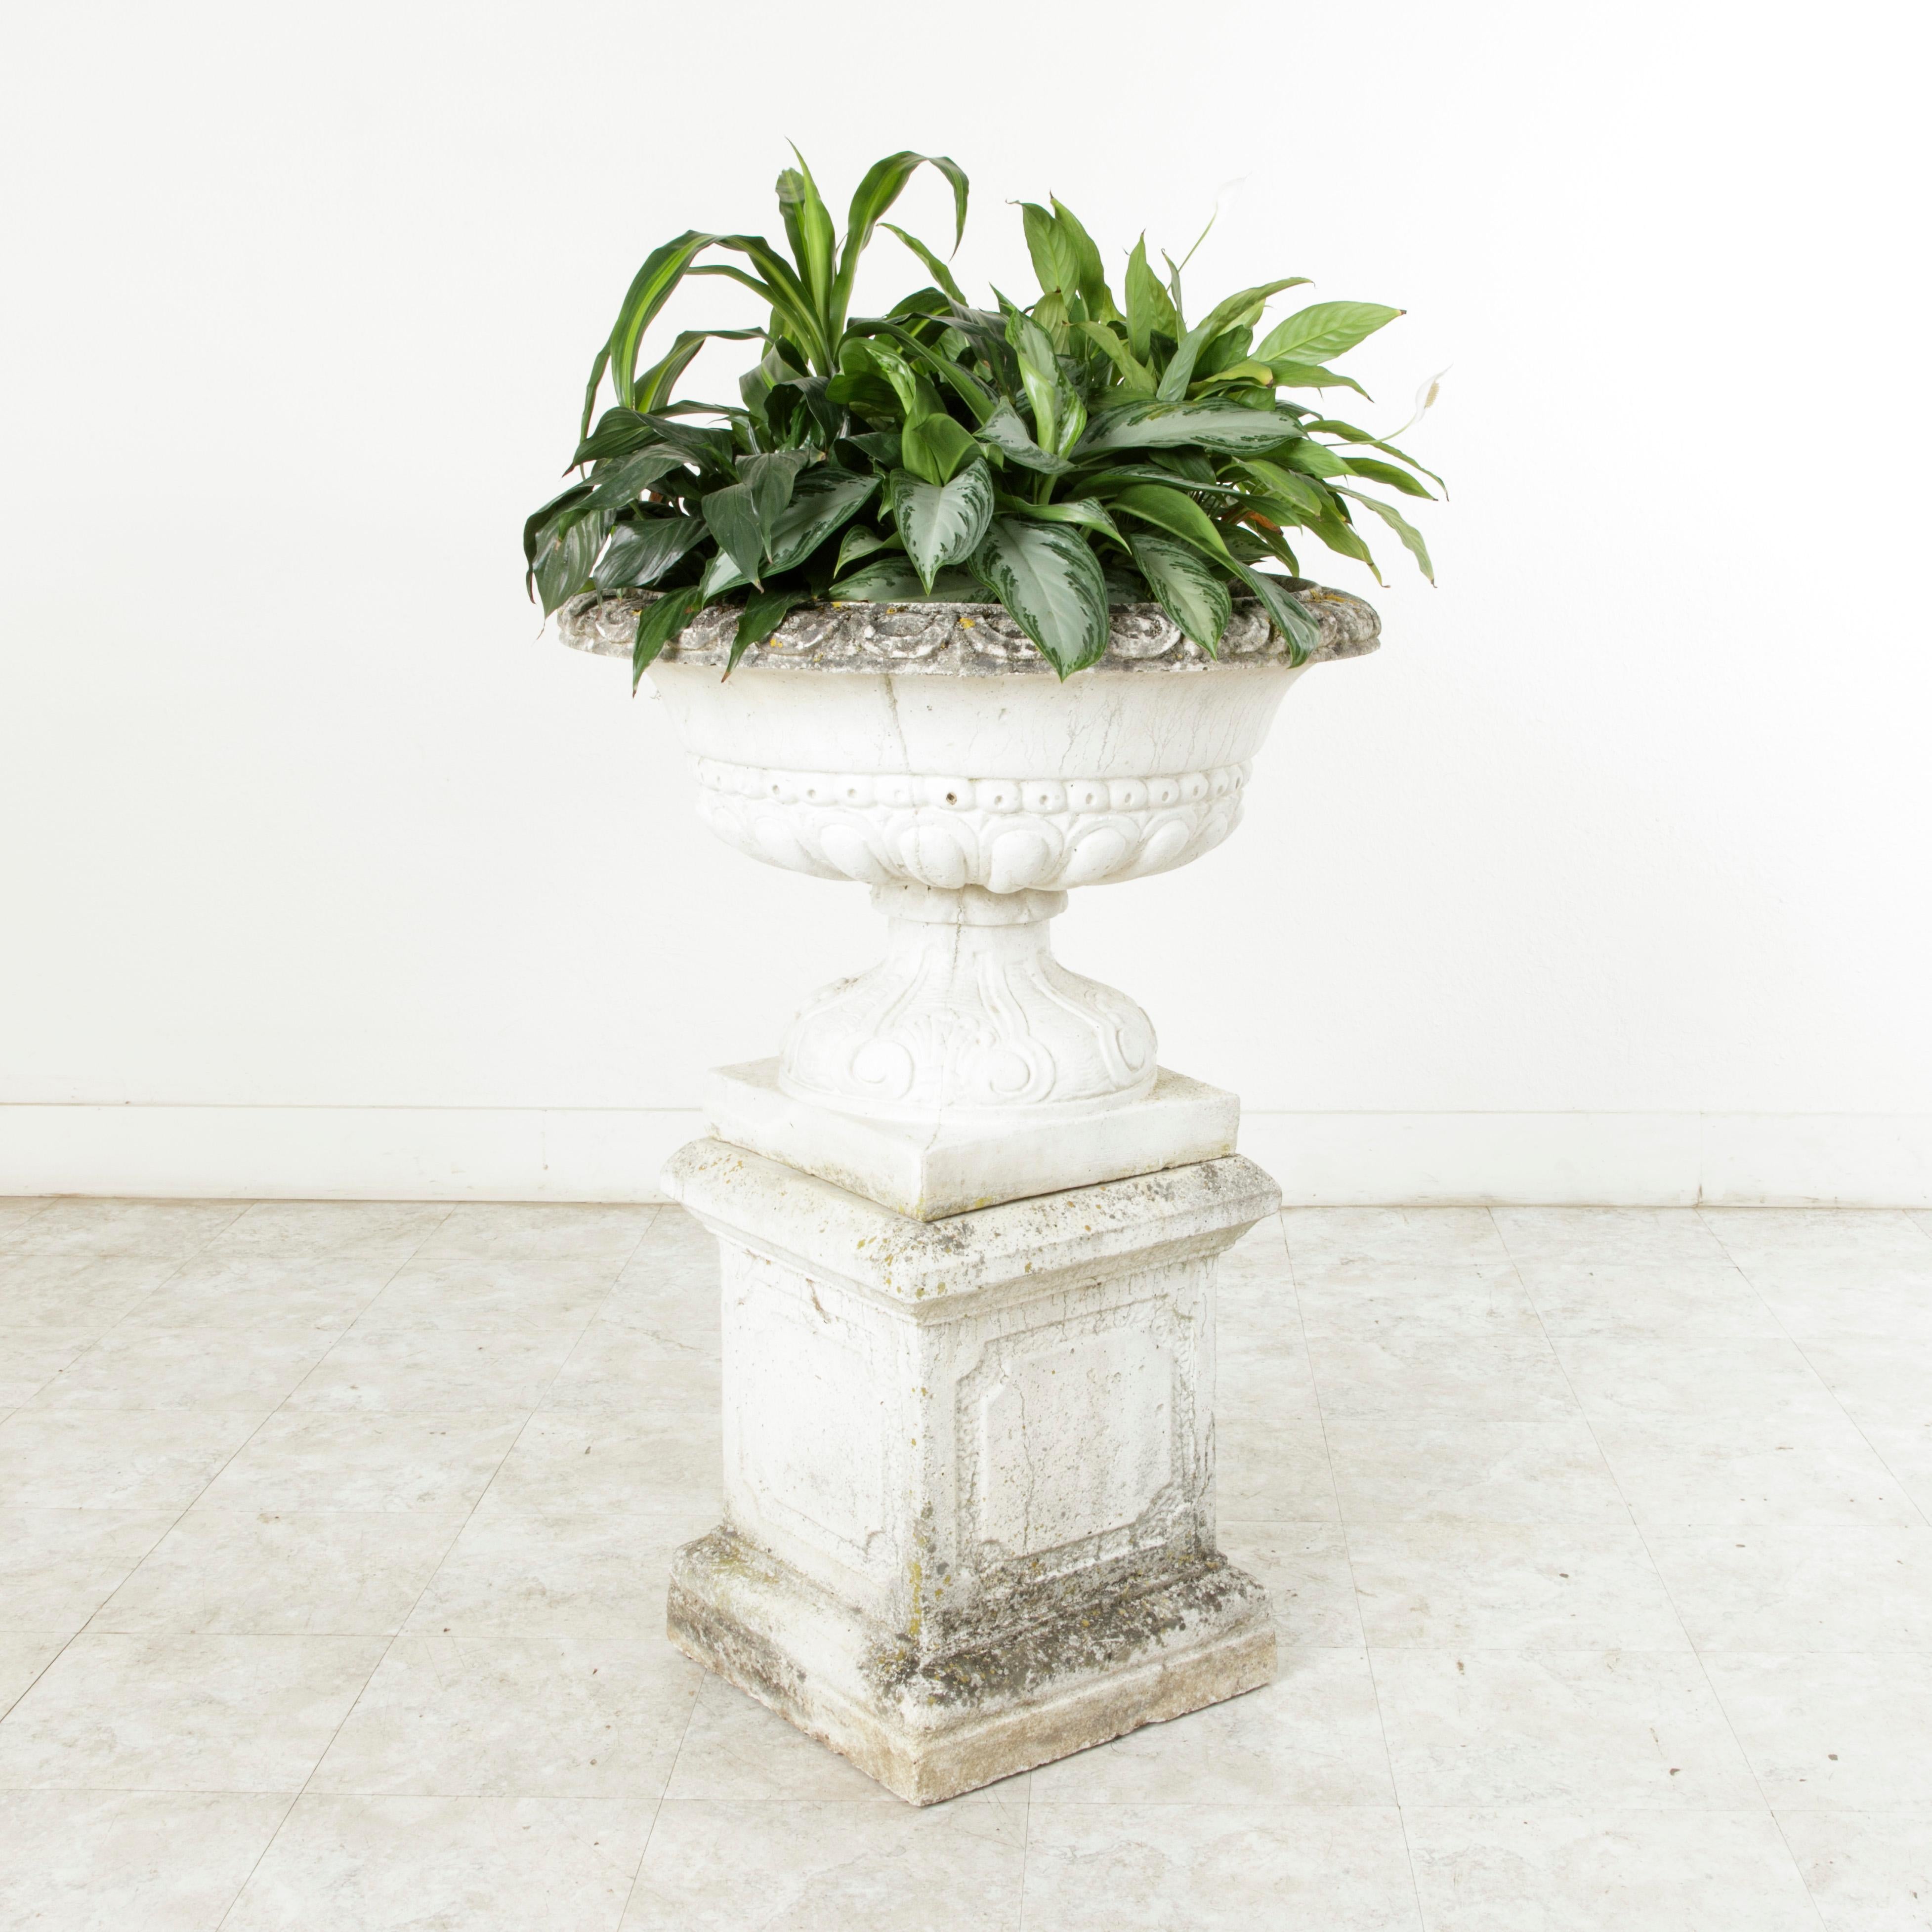 Standing at an impressive 39 inches in height with a 27 inch diameter, this very large mid-twentieth century cast stone planter features a Medicis urn detailed with egg and dart on the rim, and scrolling and shells on the base. The urn rests on a